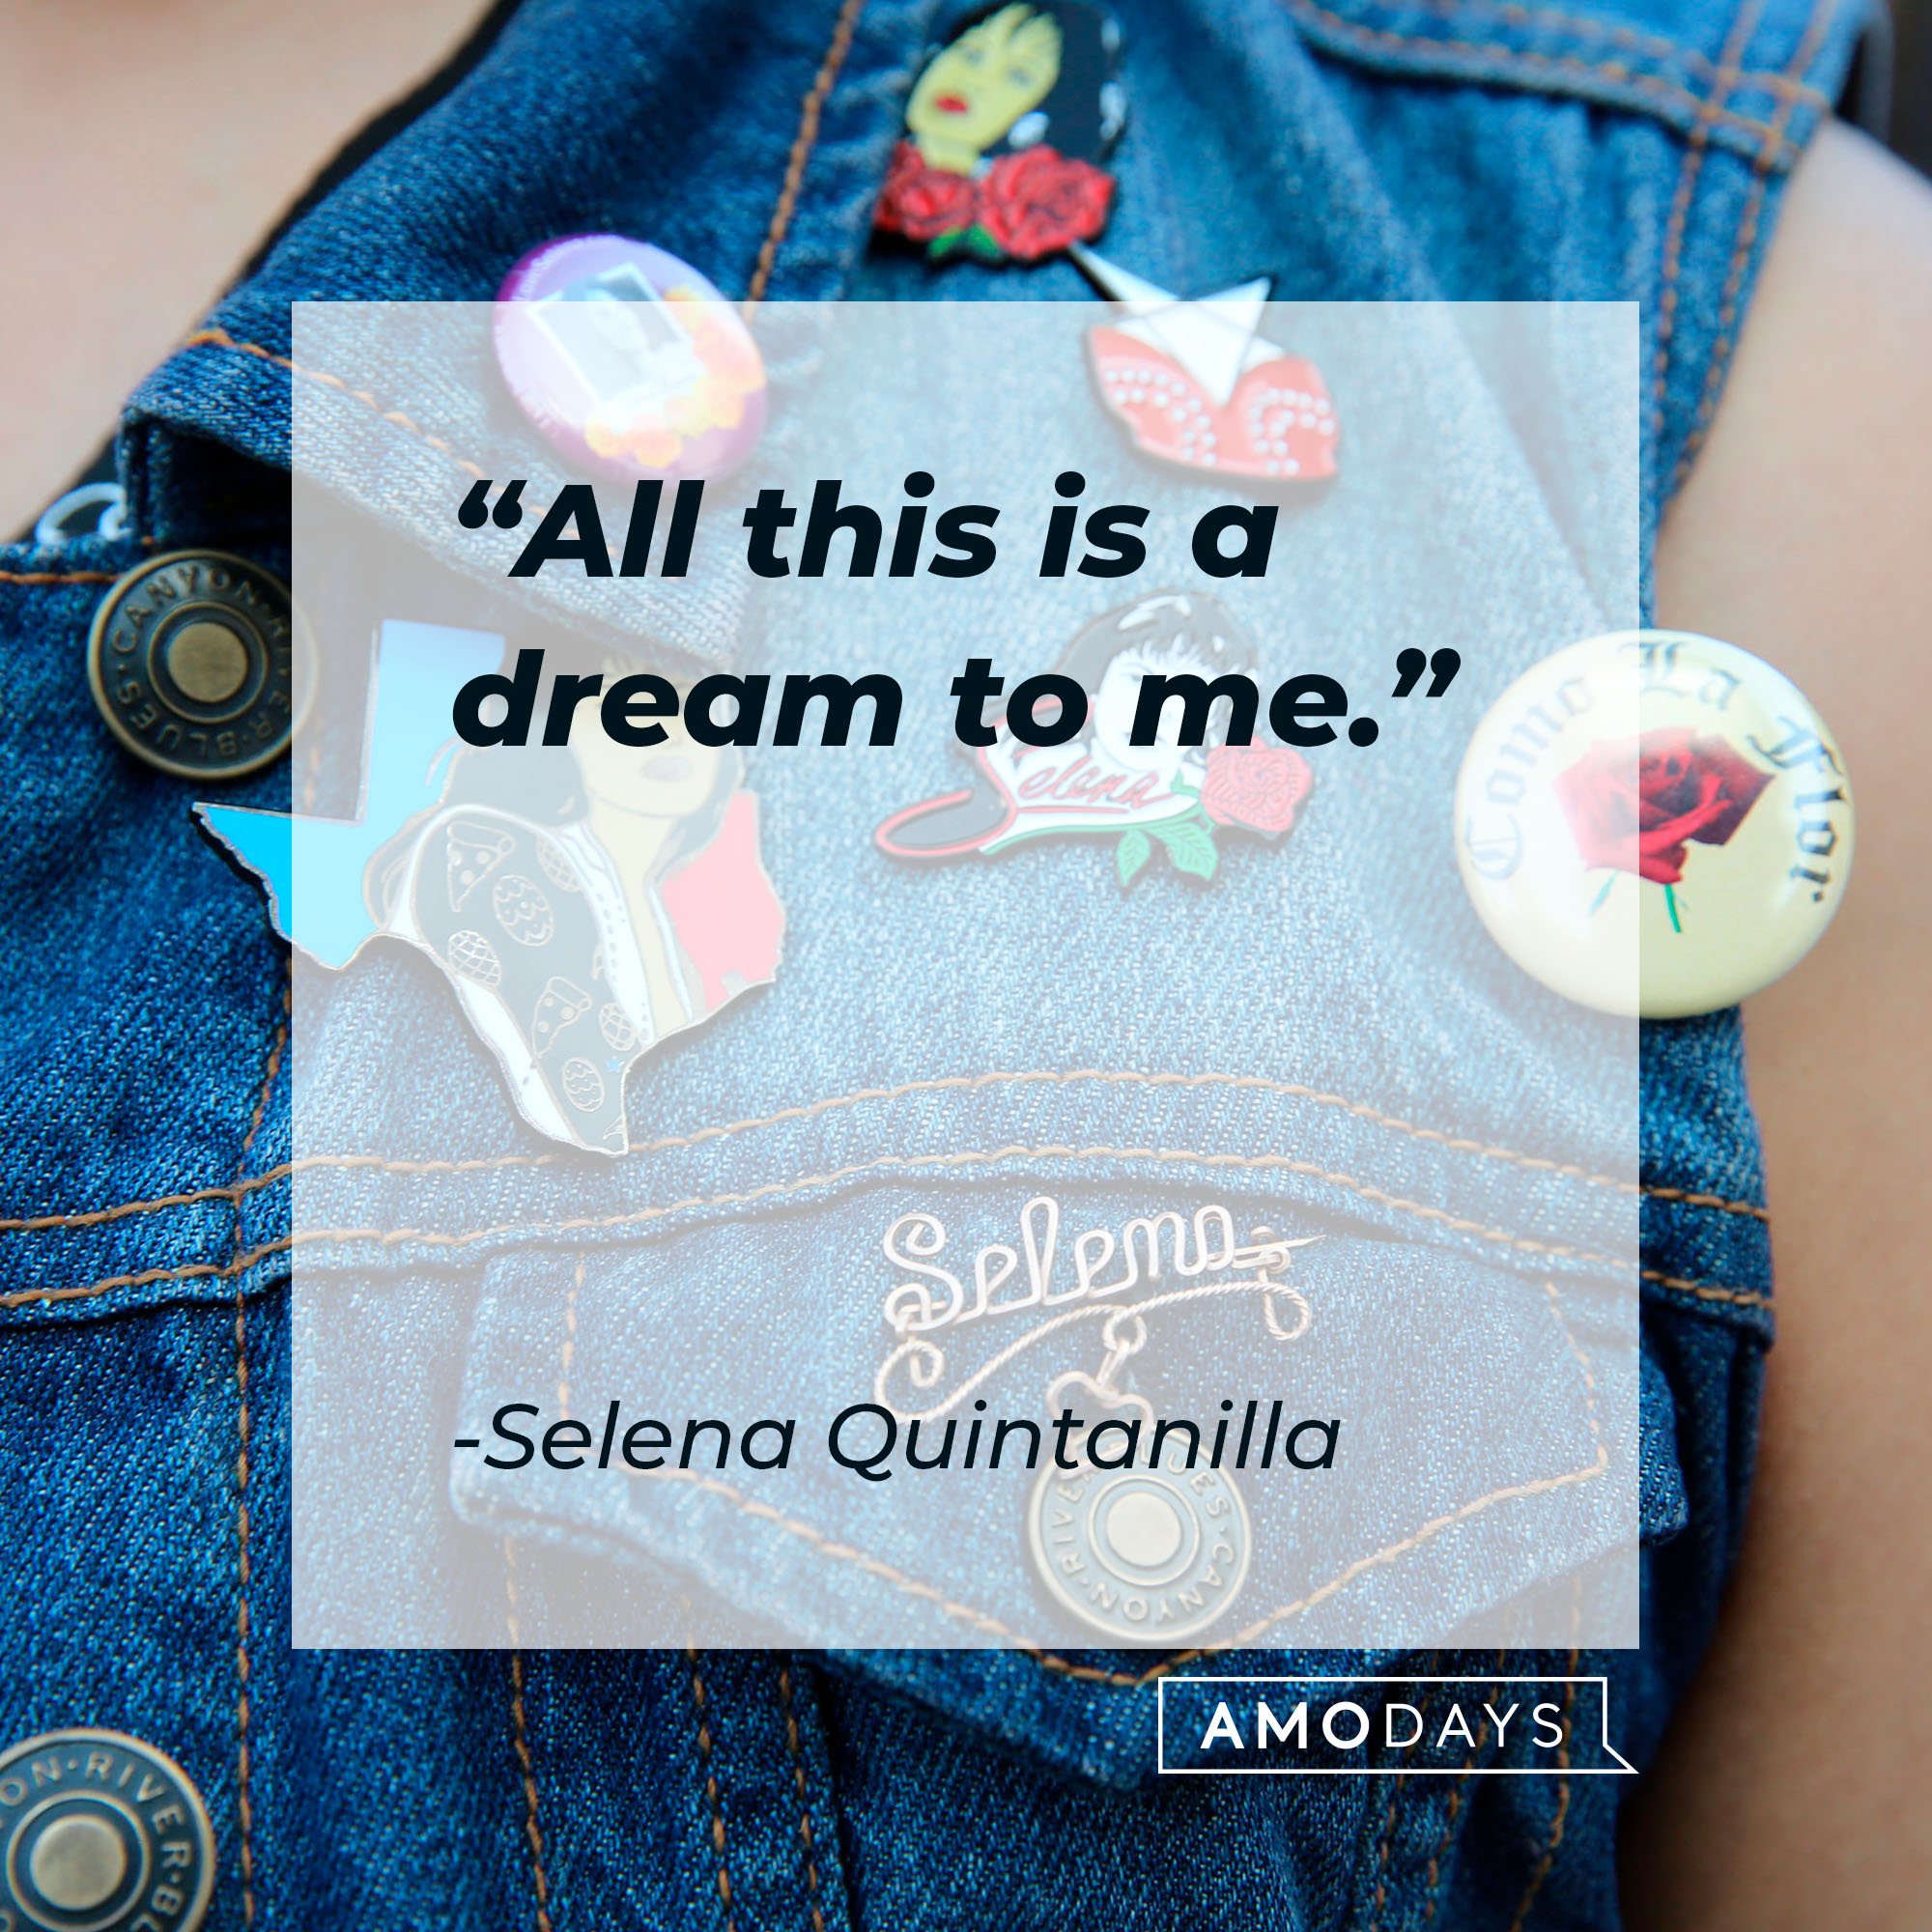 Selena Quintanilla's quote: "All this is a dream to me." | Image: AmoDays